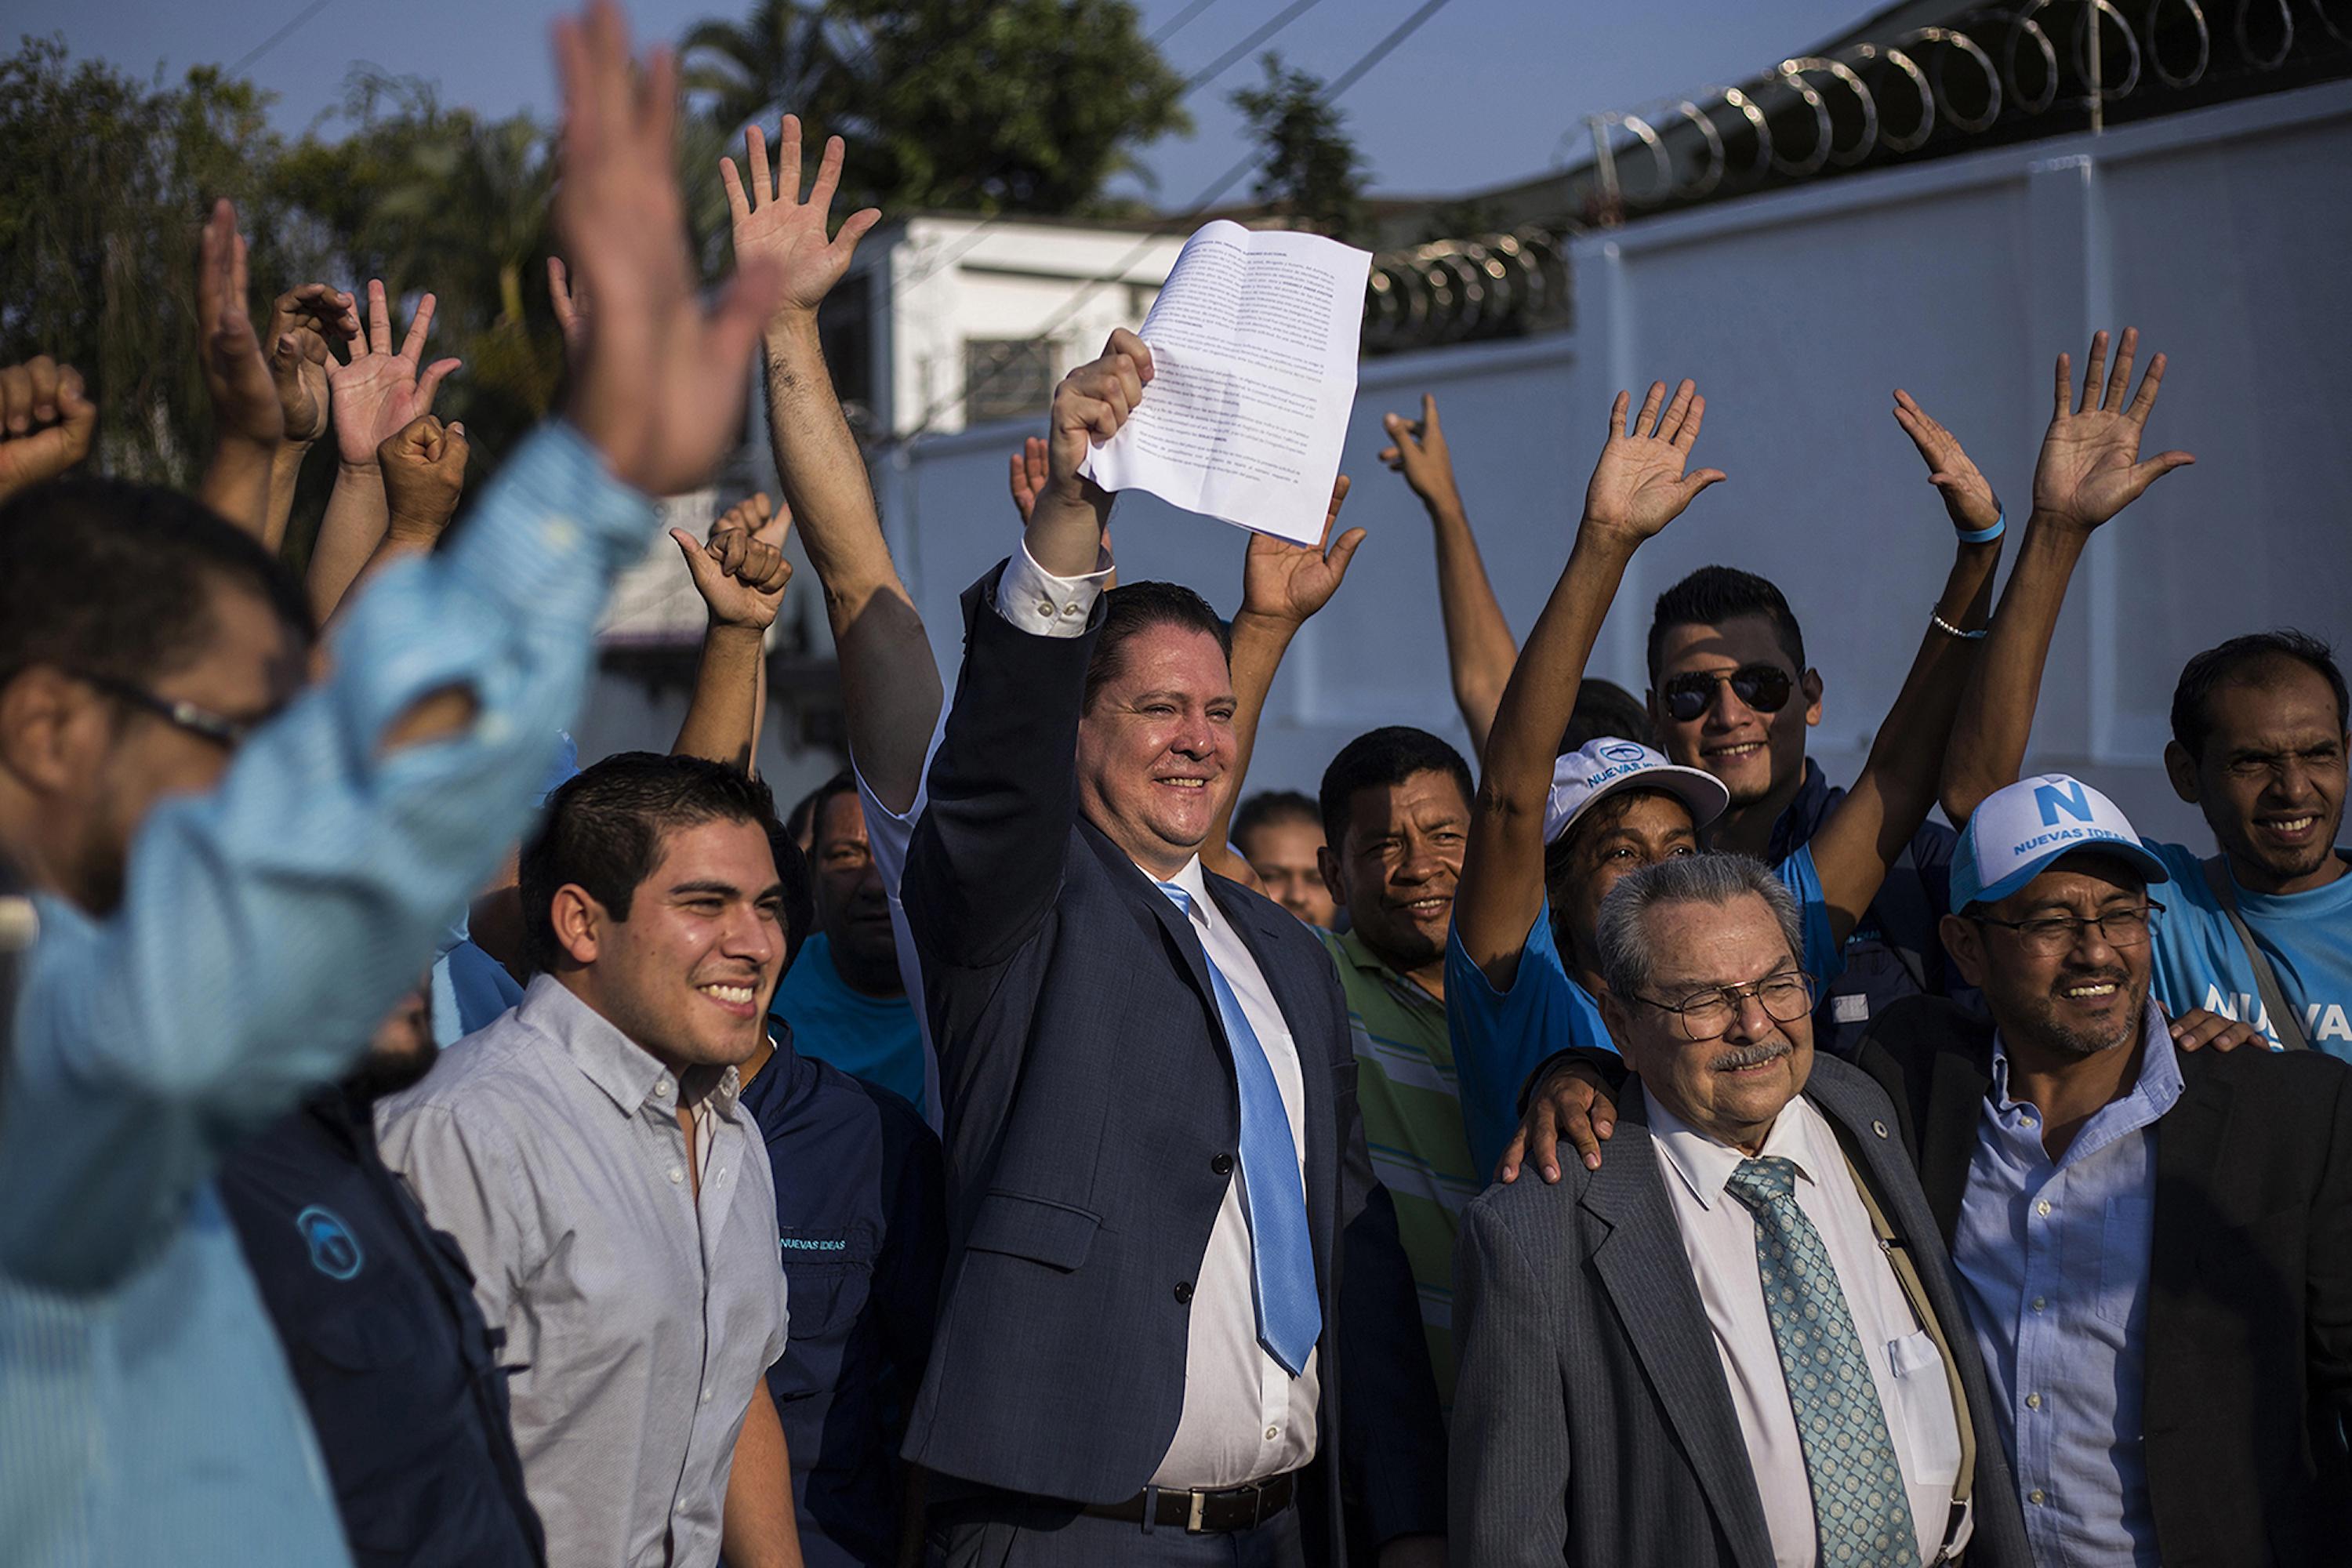 Federico Anliker, the first secretary of Nuevas Ideas, after the party formally enrolled with the Supreme Electoral Tribunal on Apr. 4, 2018. Photo: Víctor Peña/El Faro